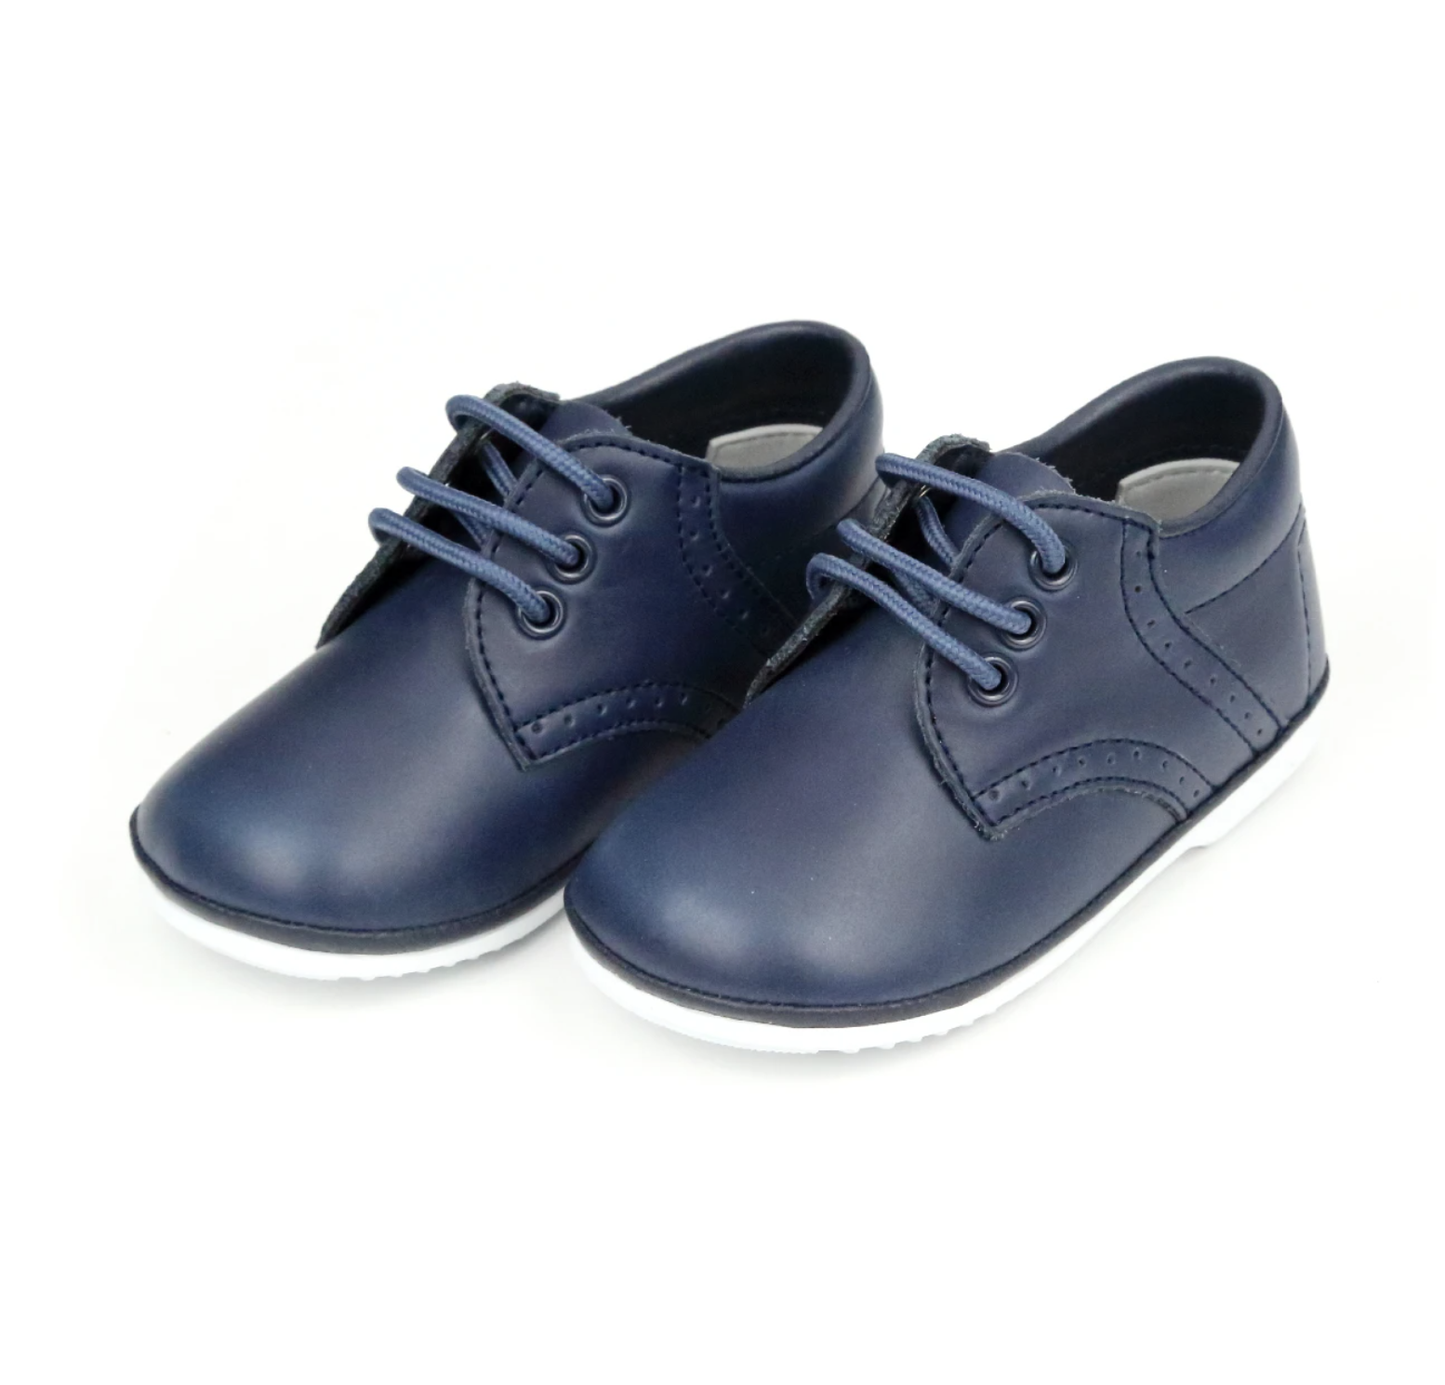 James Leather Lace Up - 2157